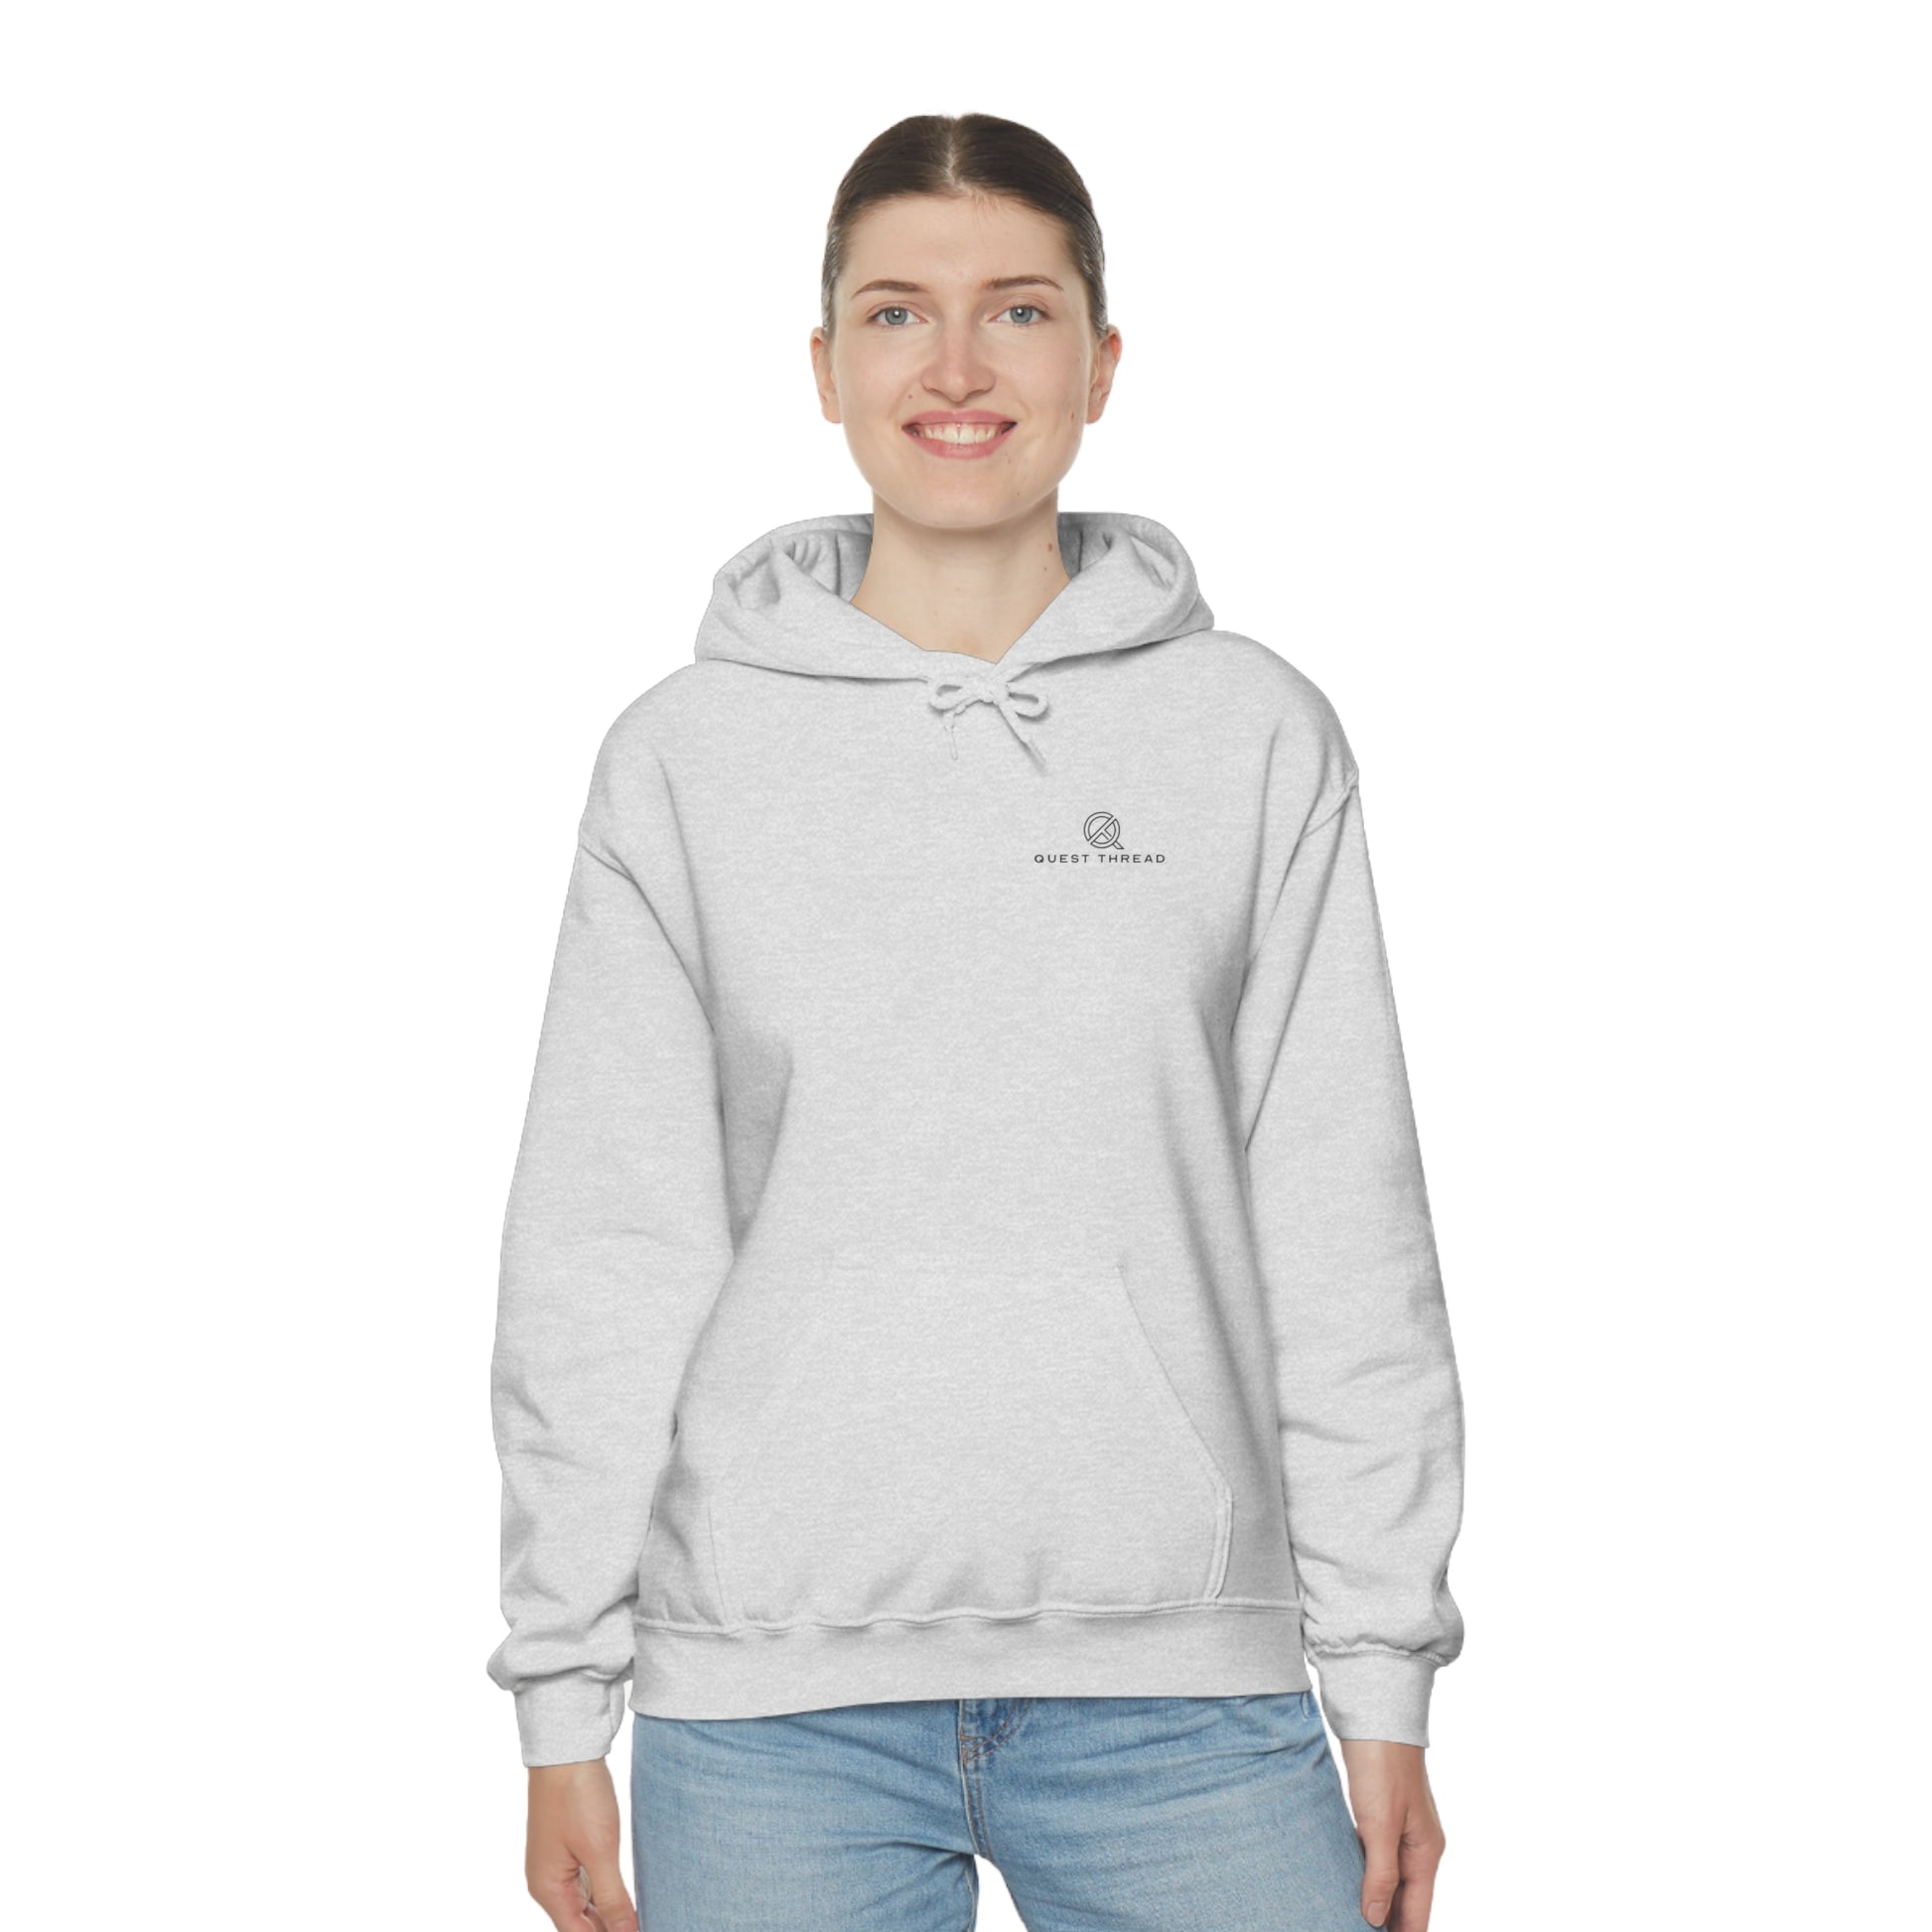 ash-quest-thread-hoodie-with-small-logo-on-left-chest